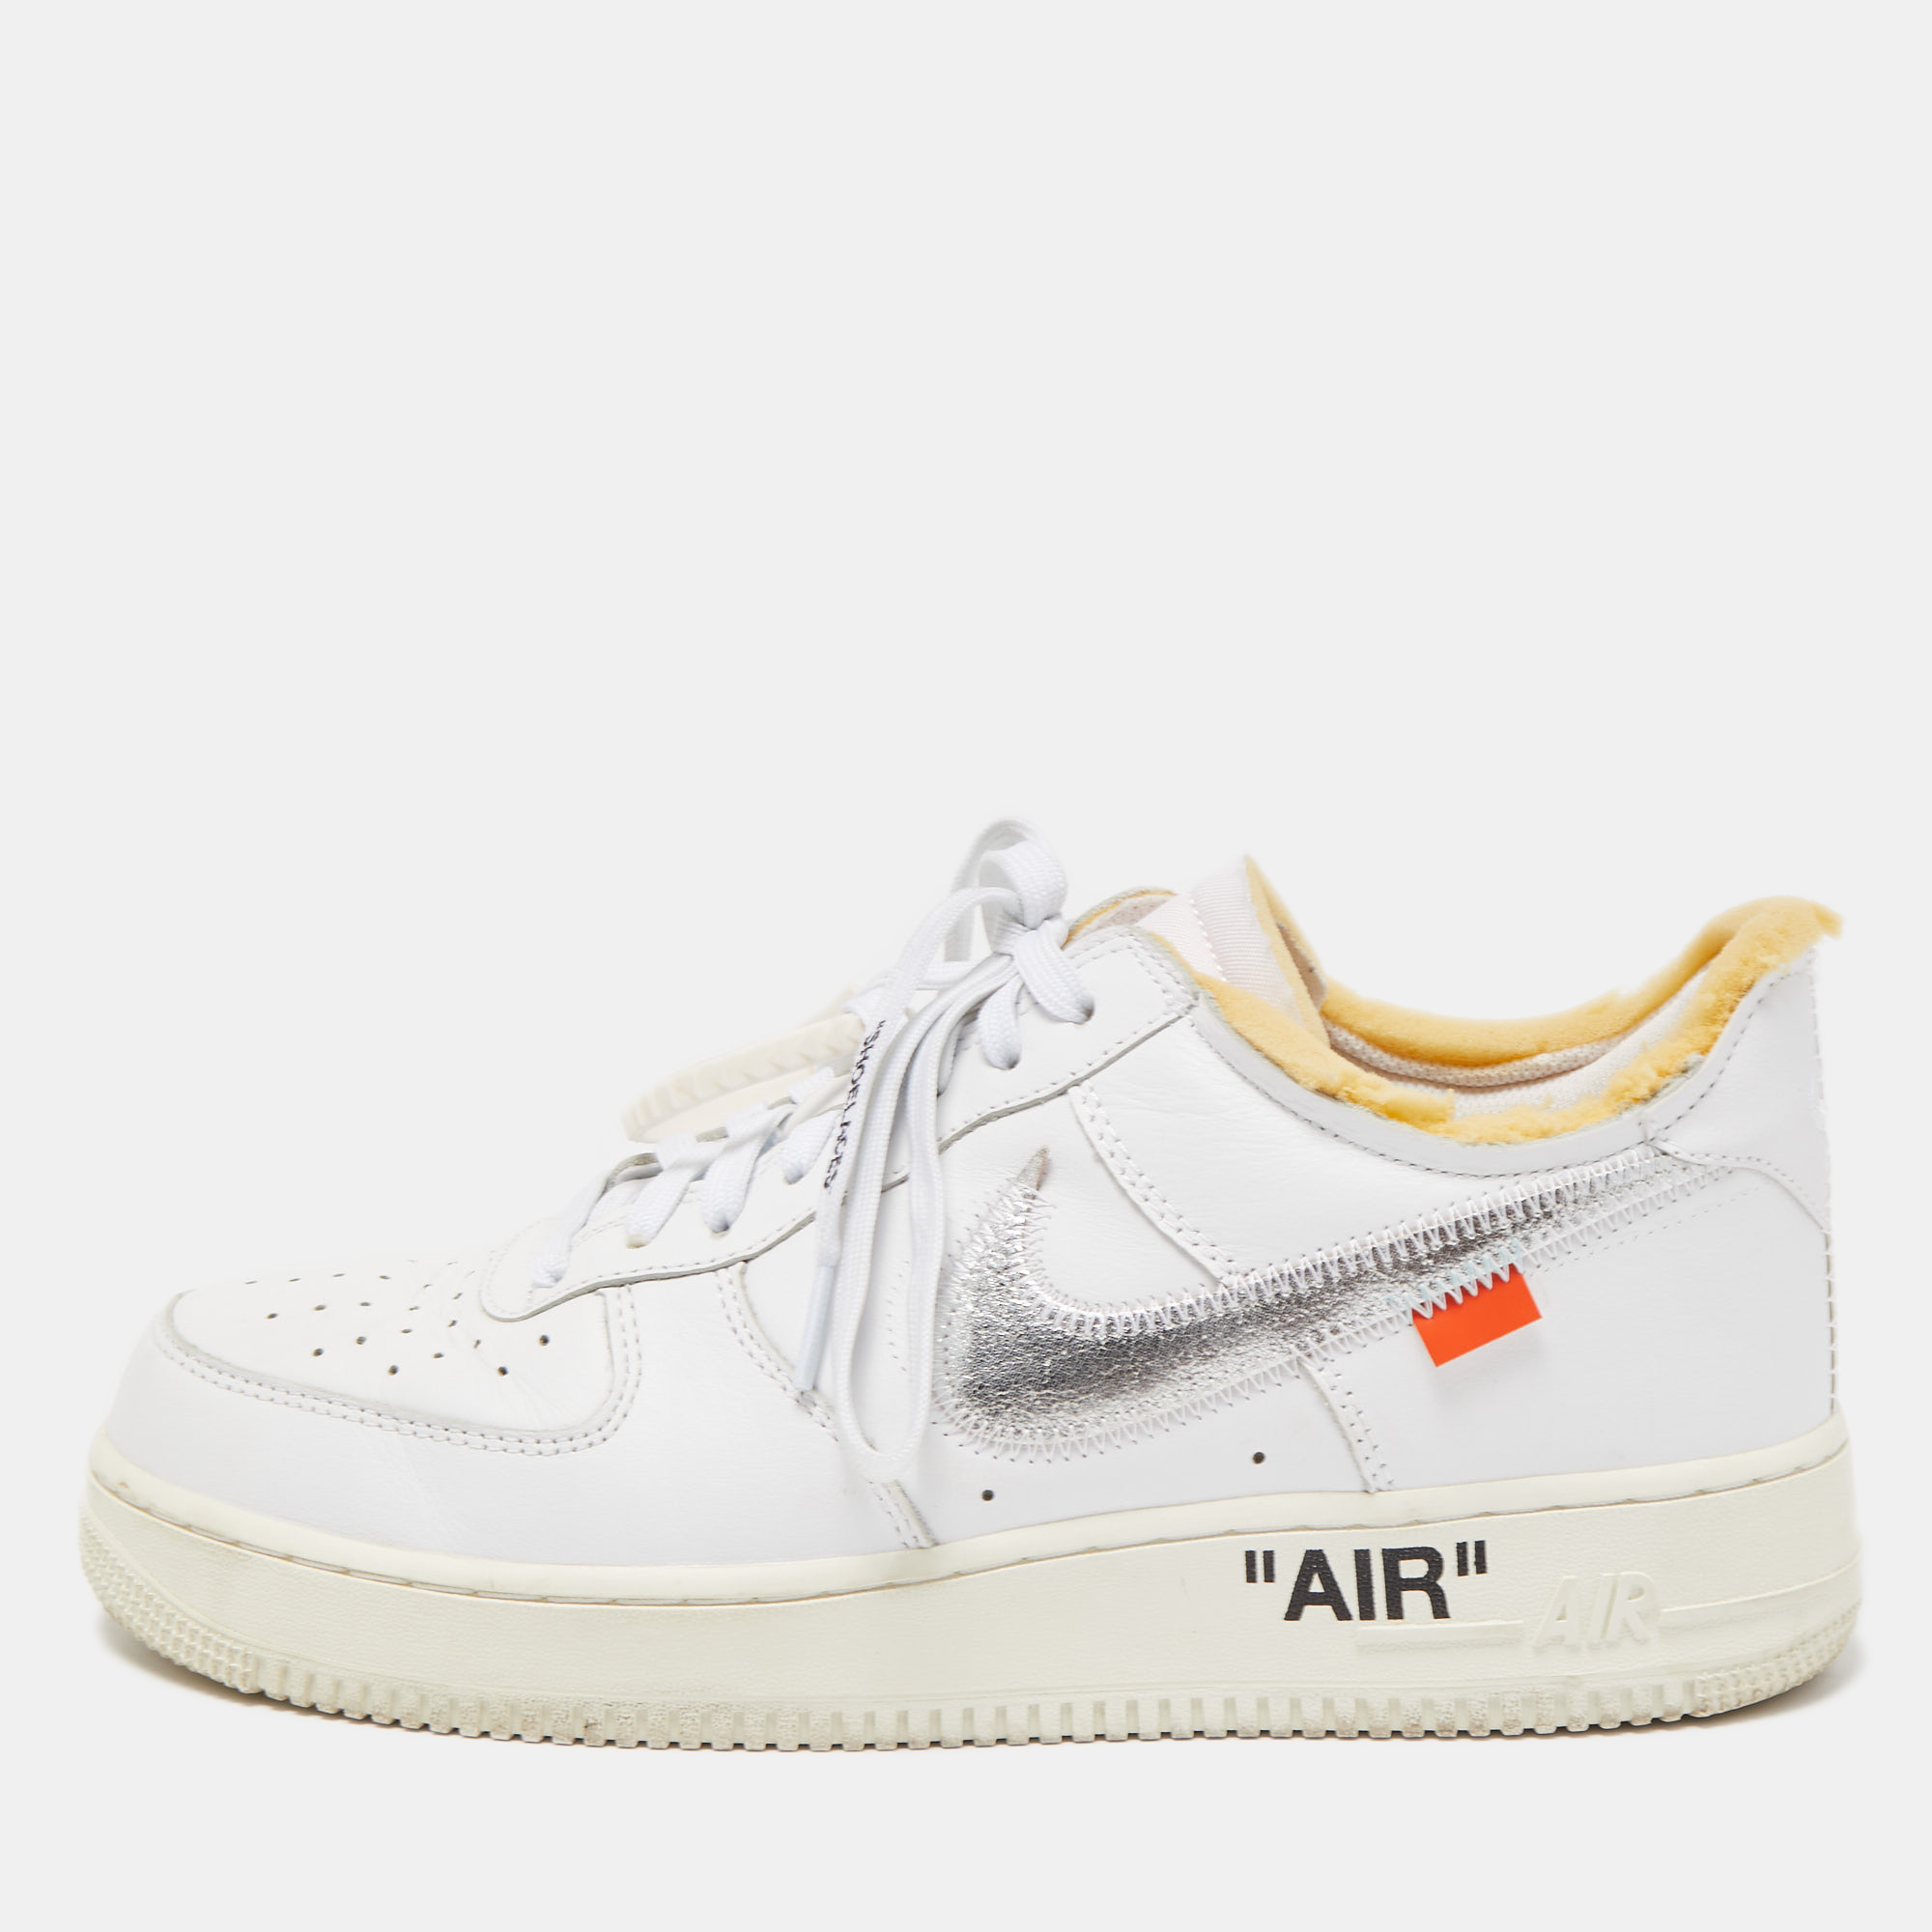 Nike Off-White Air Force 1 Trainer